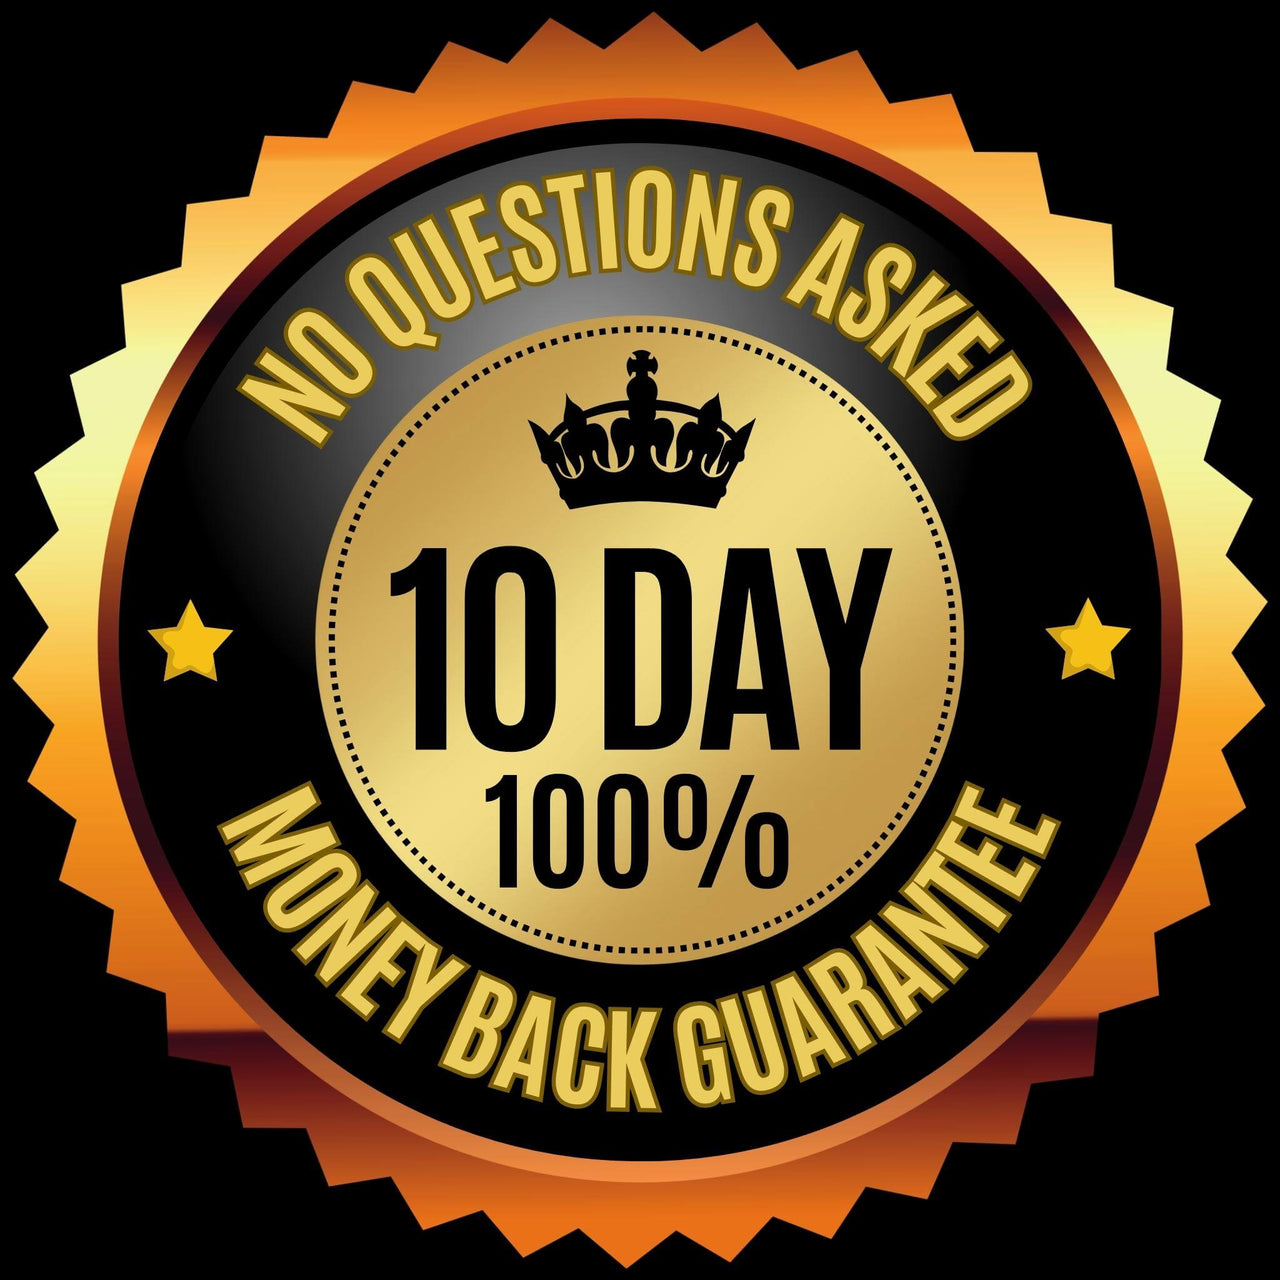 Candlelore Legends no questions asked, 10 day, 100% money back guarantee